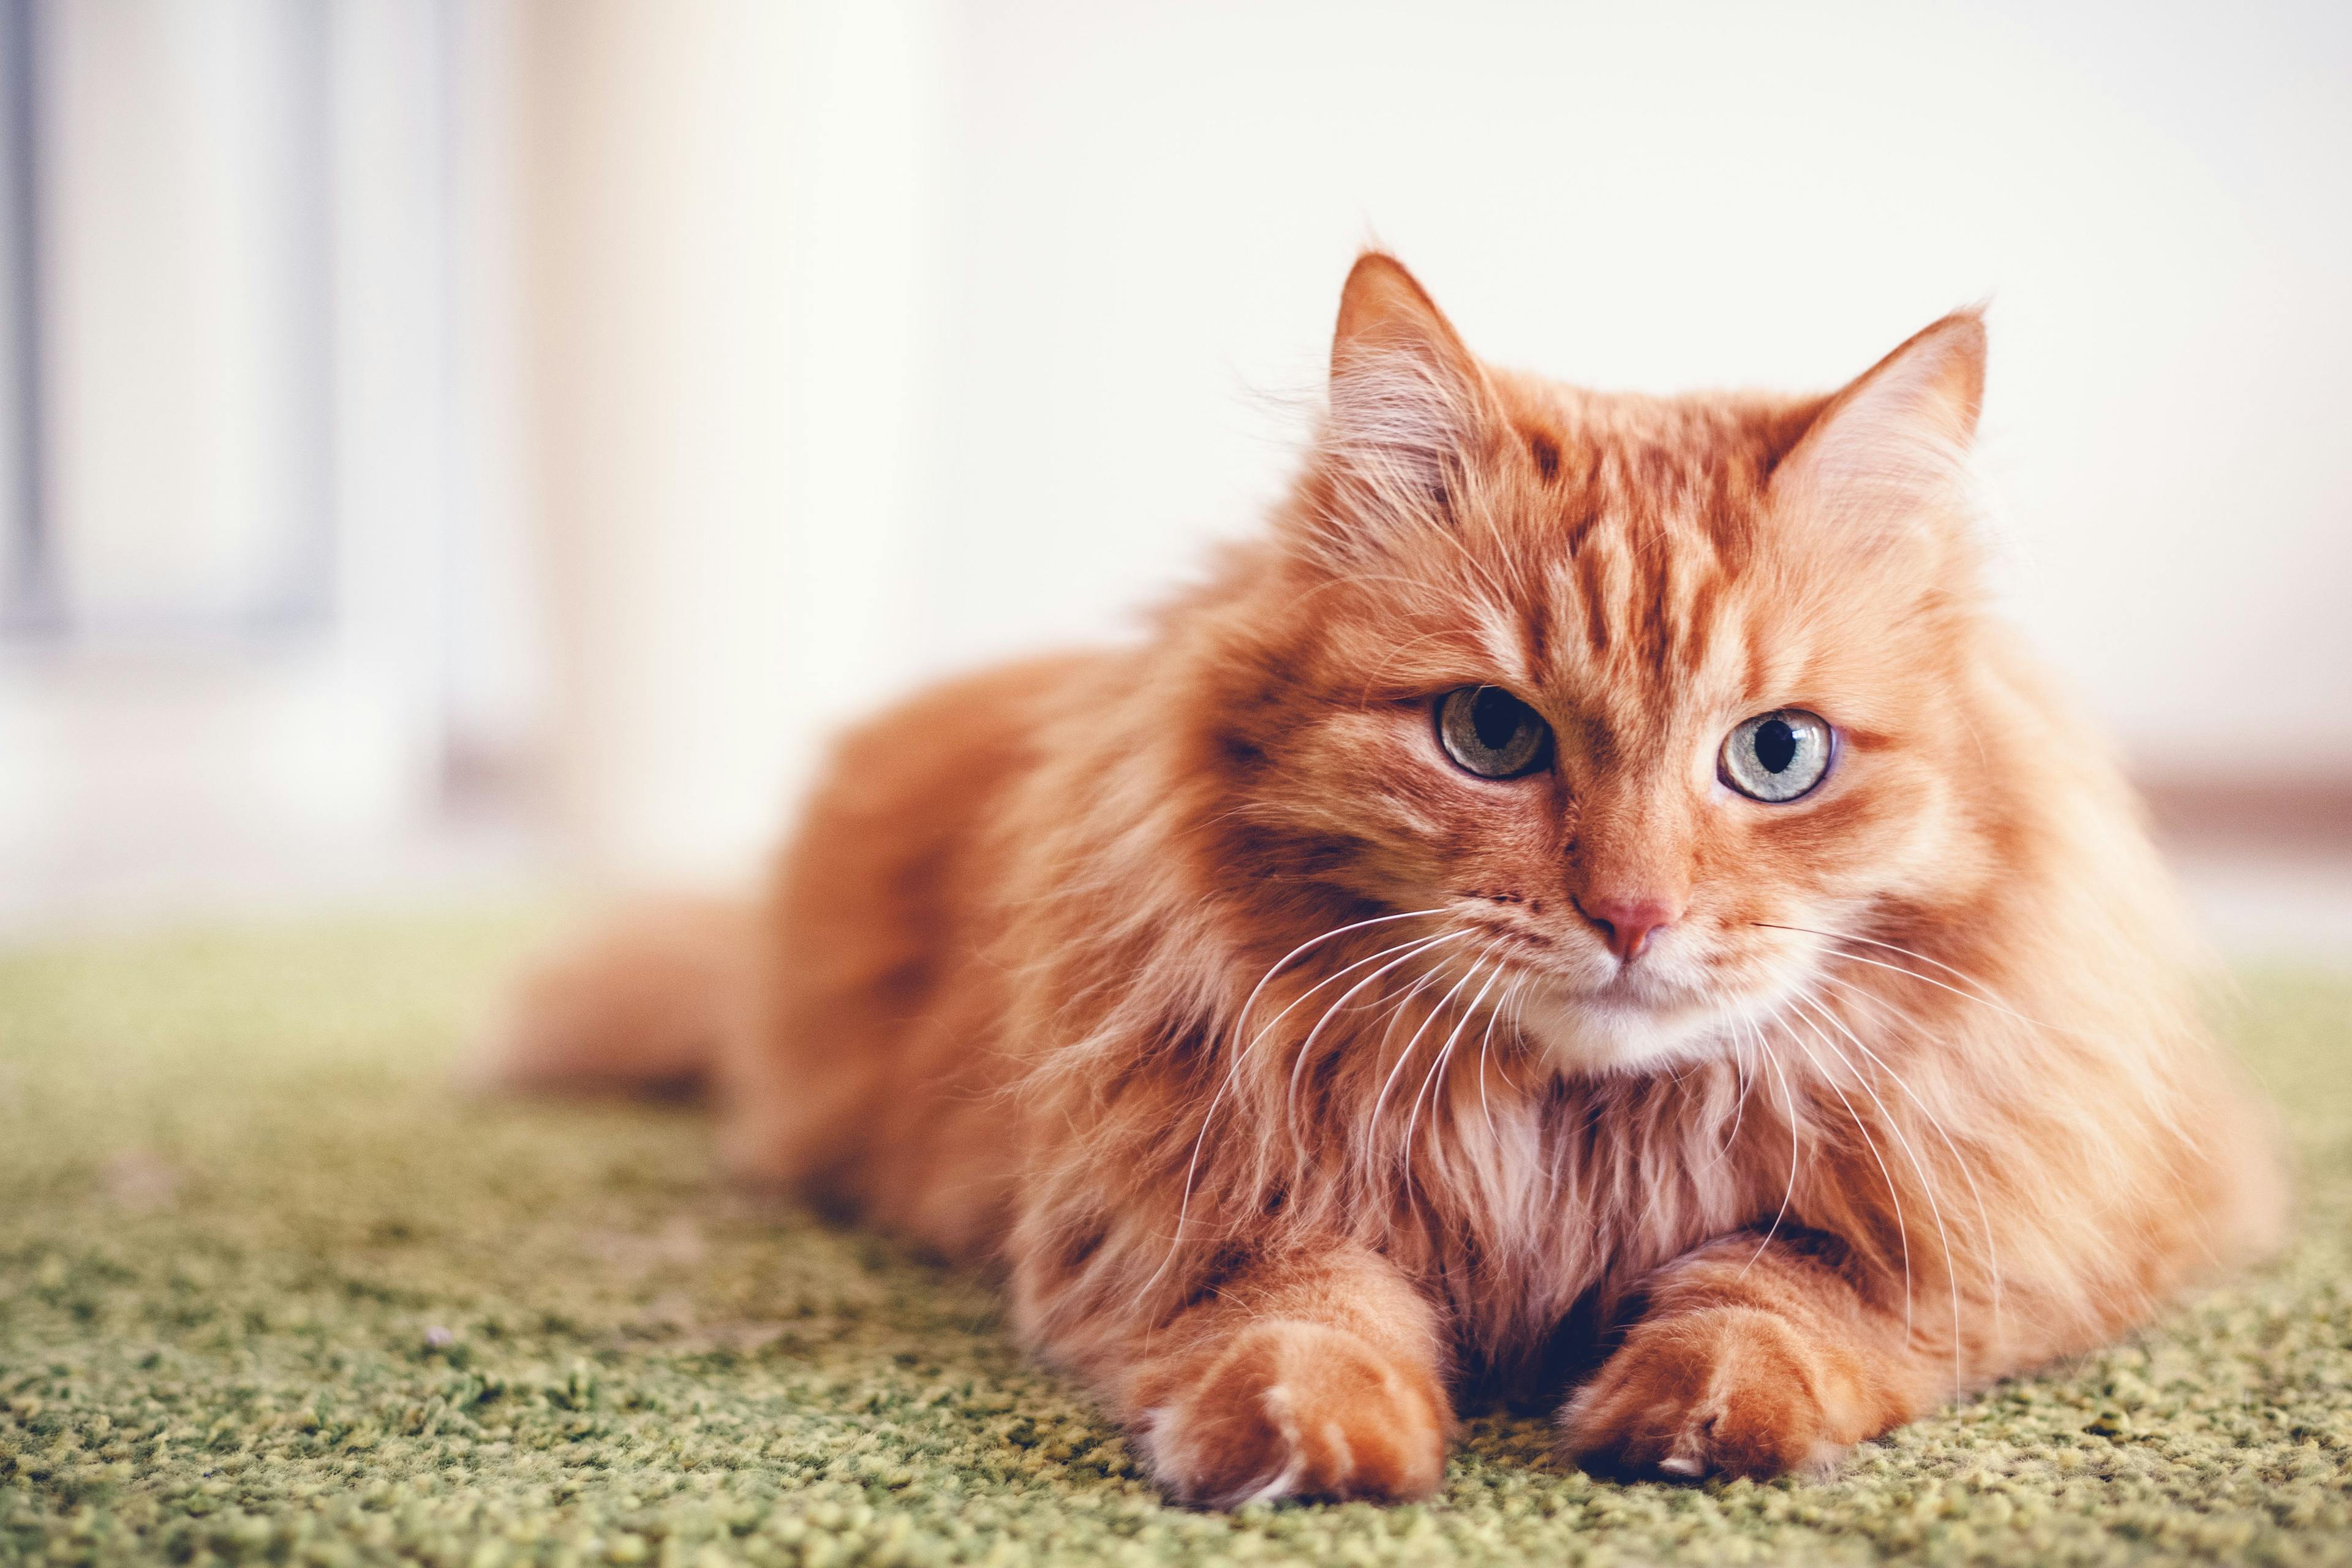 Cat tests positive for COVID-19, but there is no cause for panic